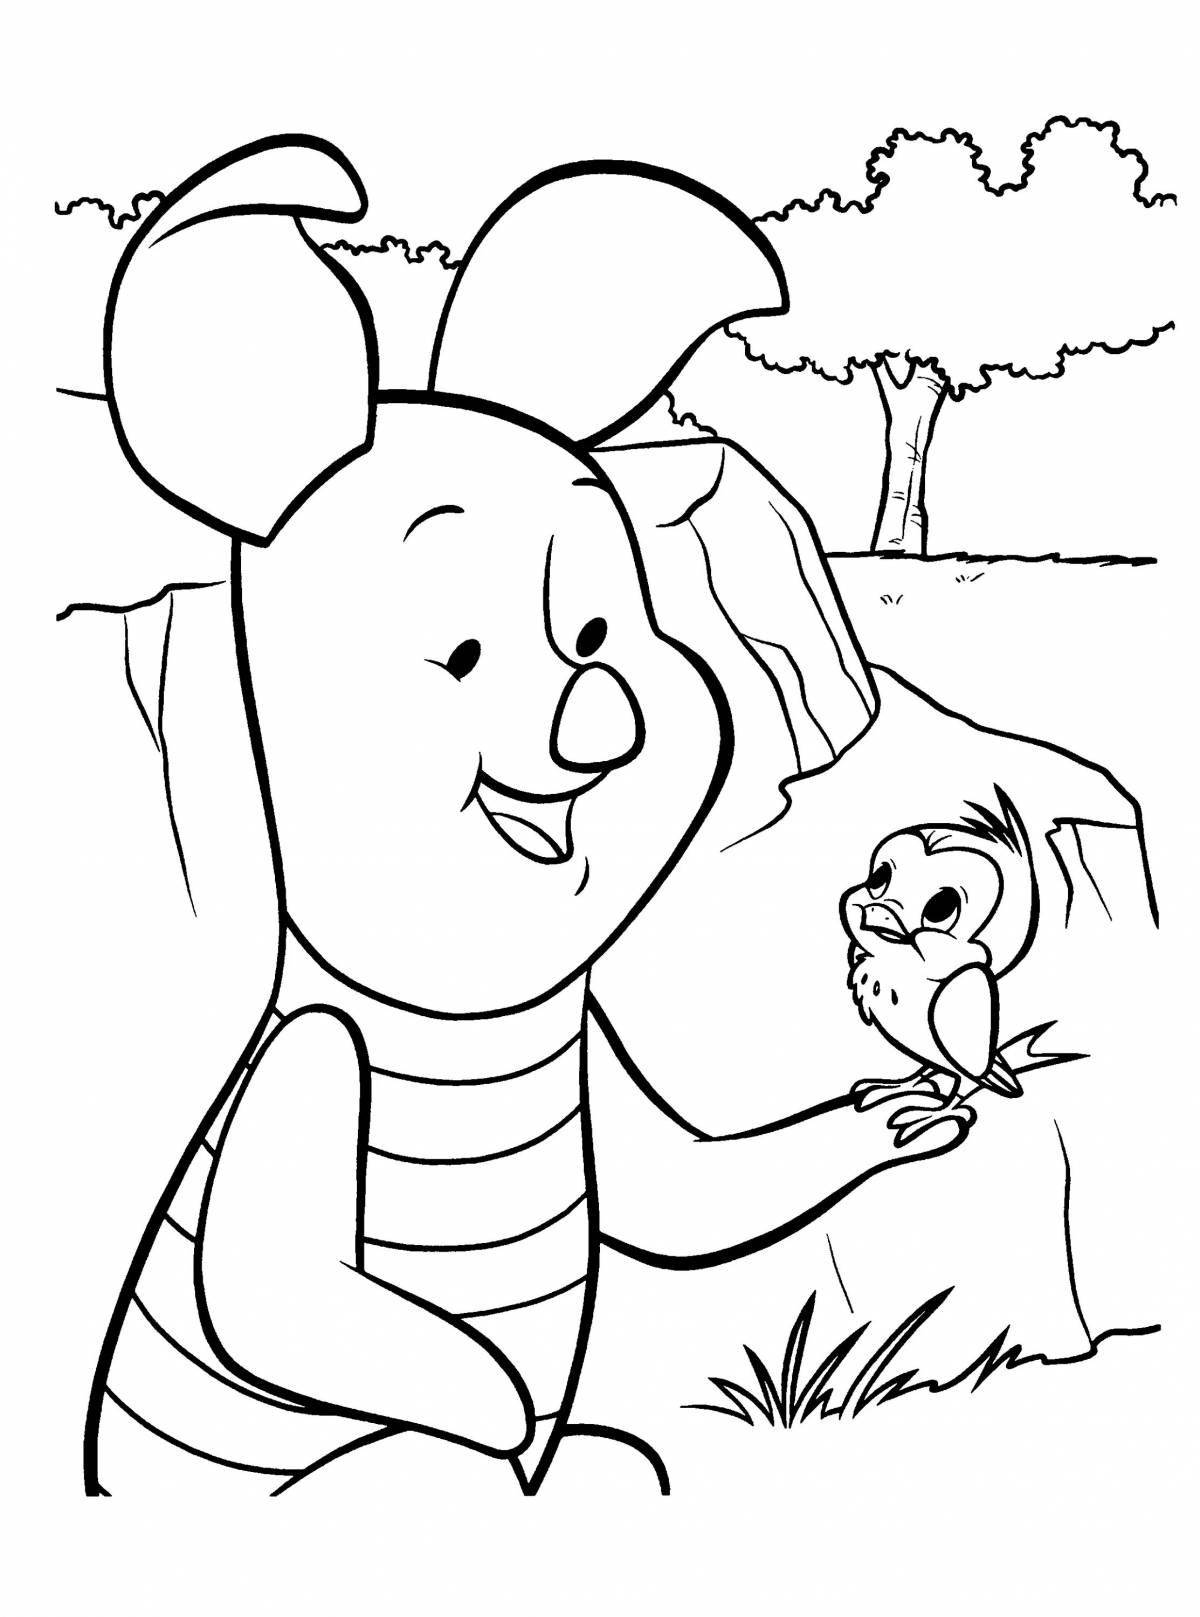 Cute Winnie the Pooh and Piglet Coloring